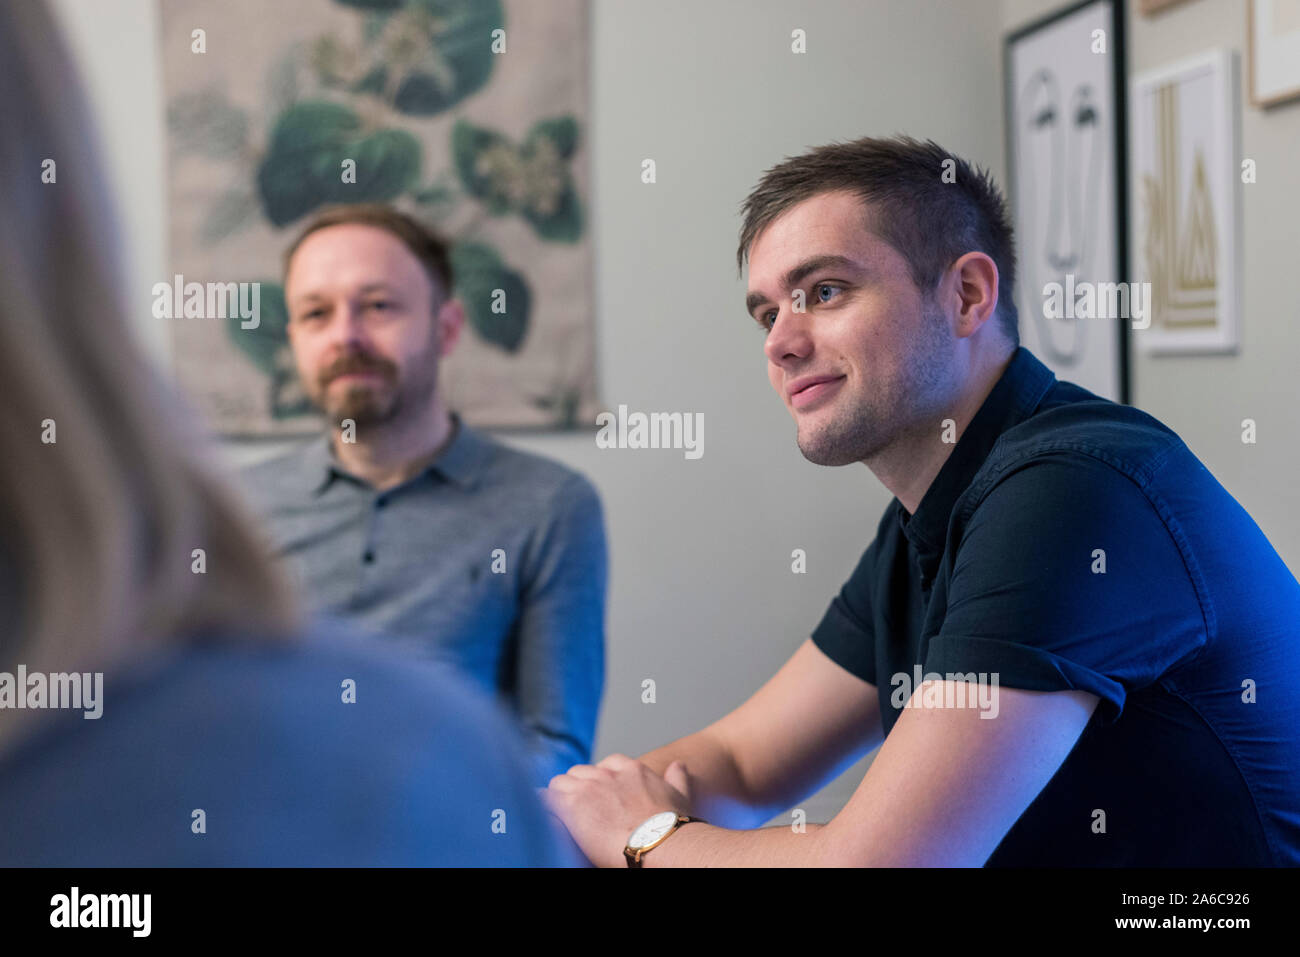 A relaxed and informal creative meeting at a table with laptops. Stock Photo